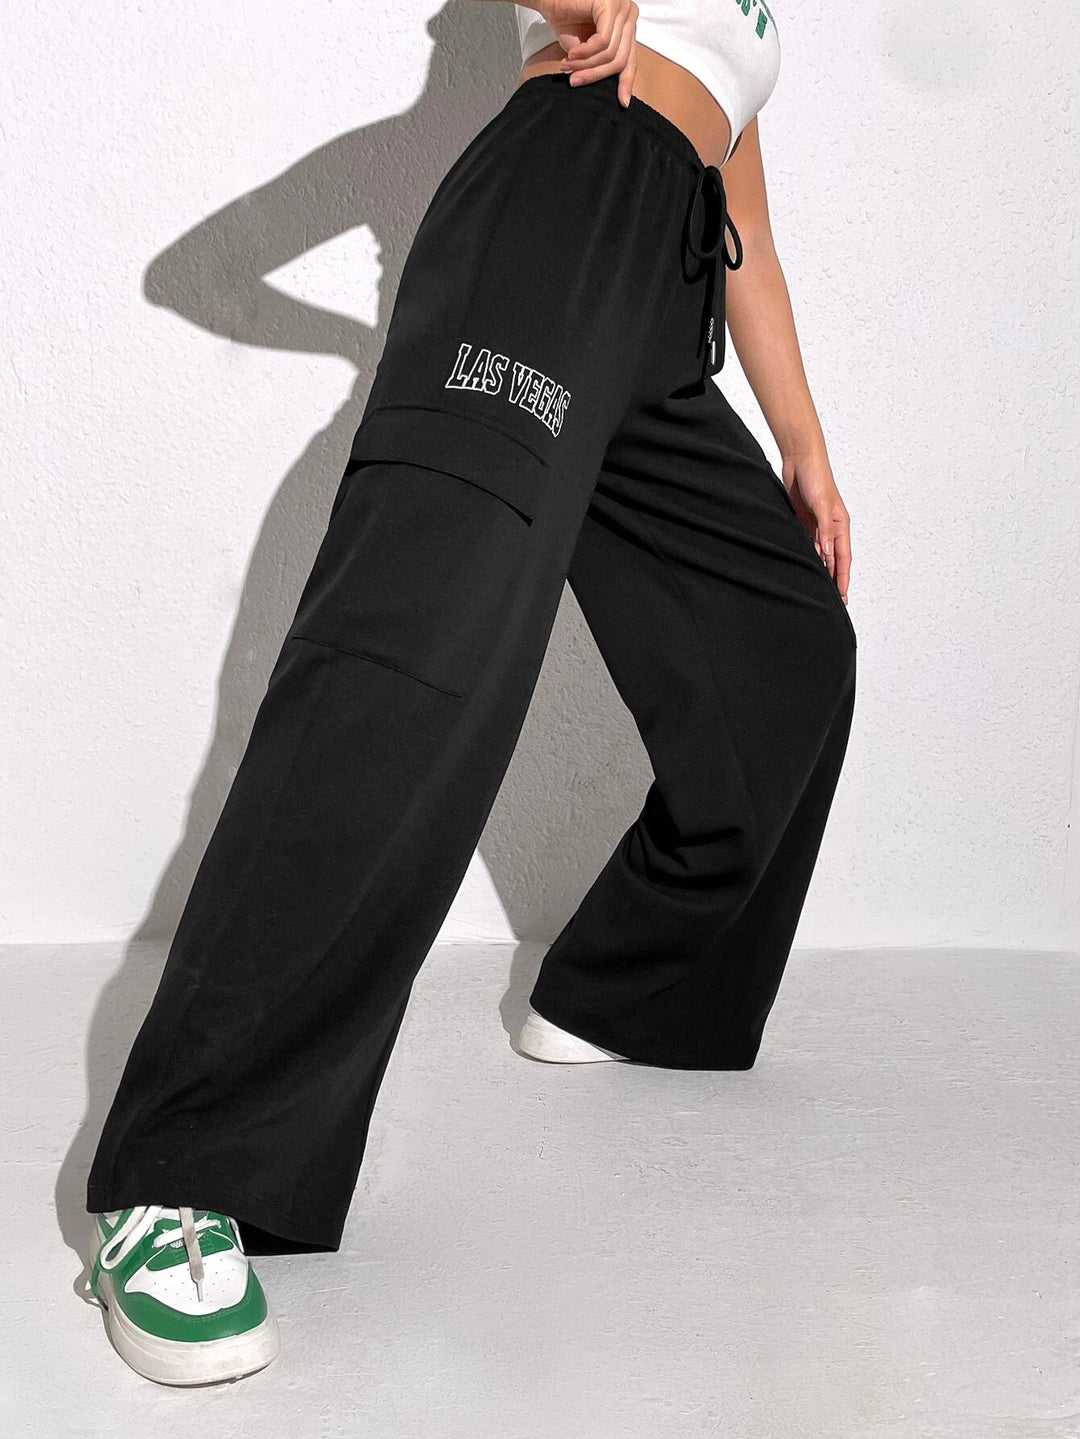 Letter Embroidery Drawstring Flap Pocket Cargo Pants